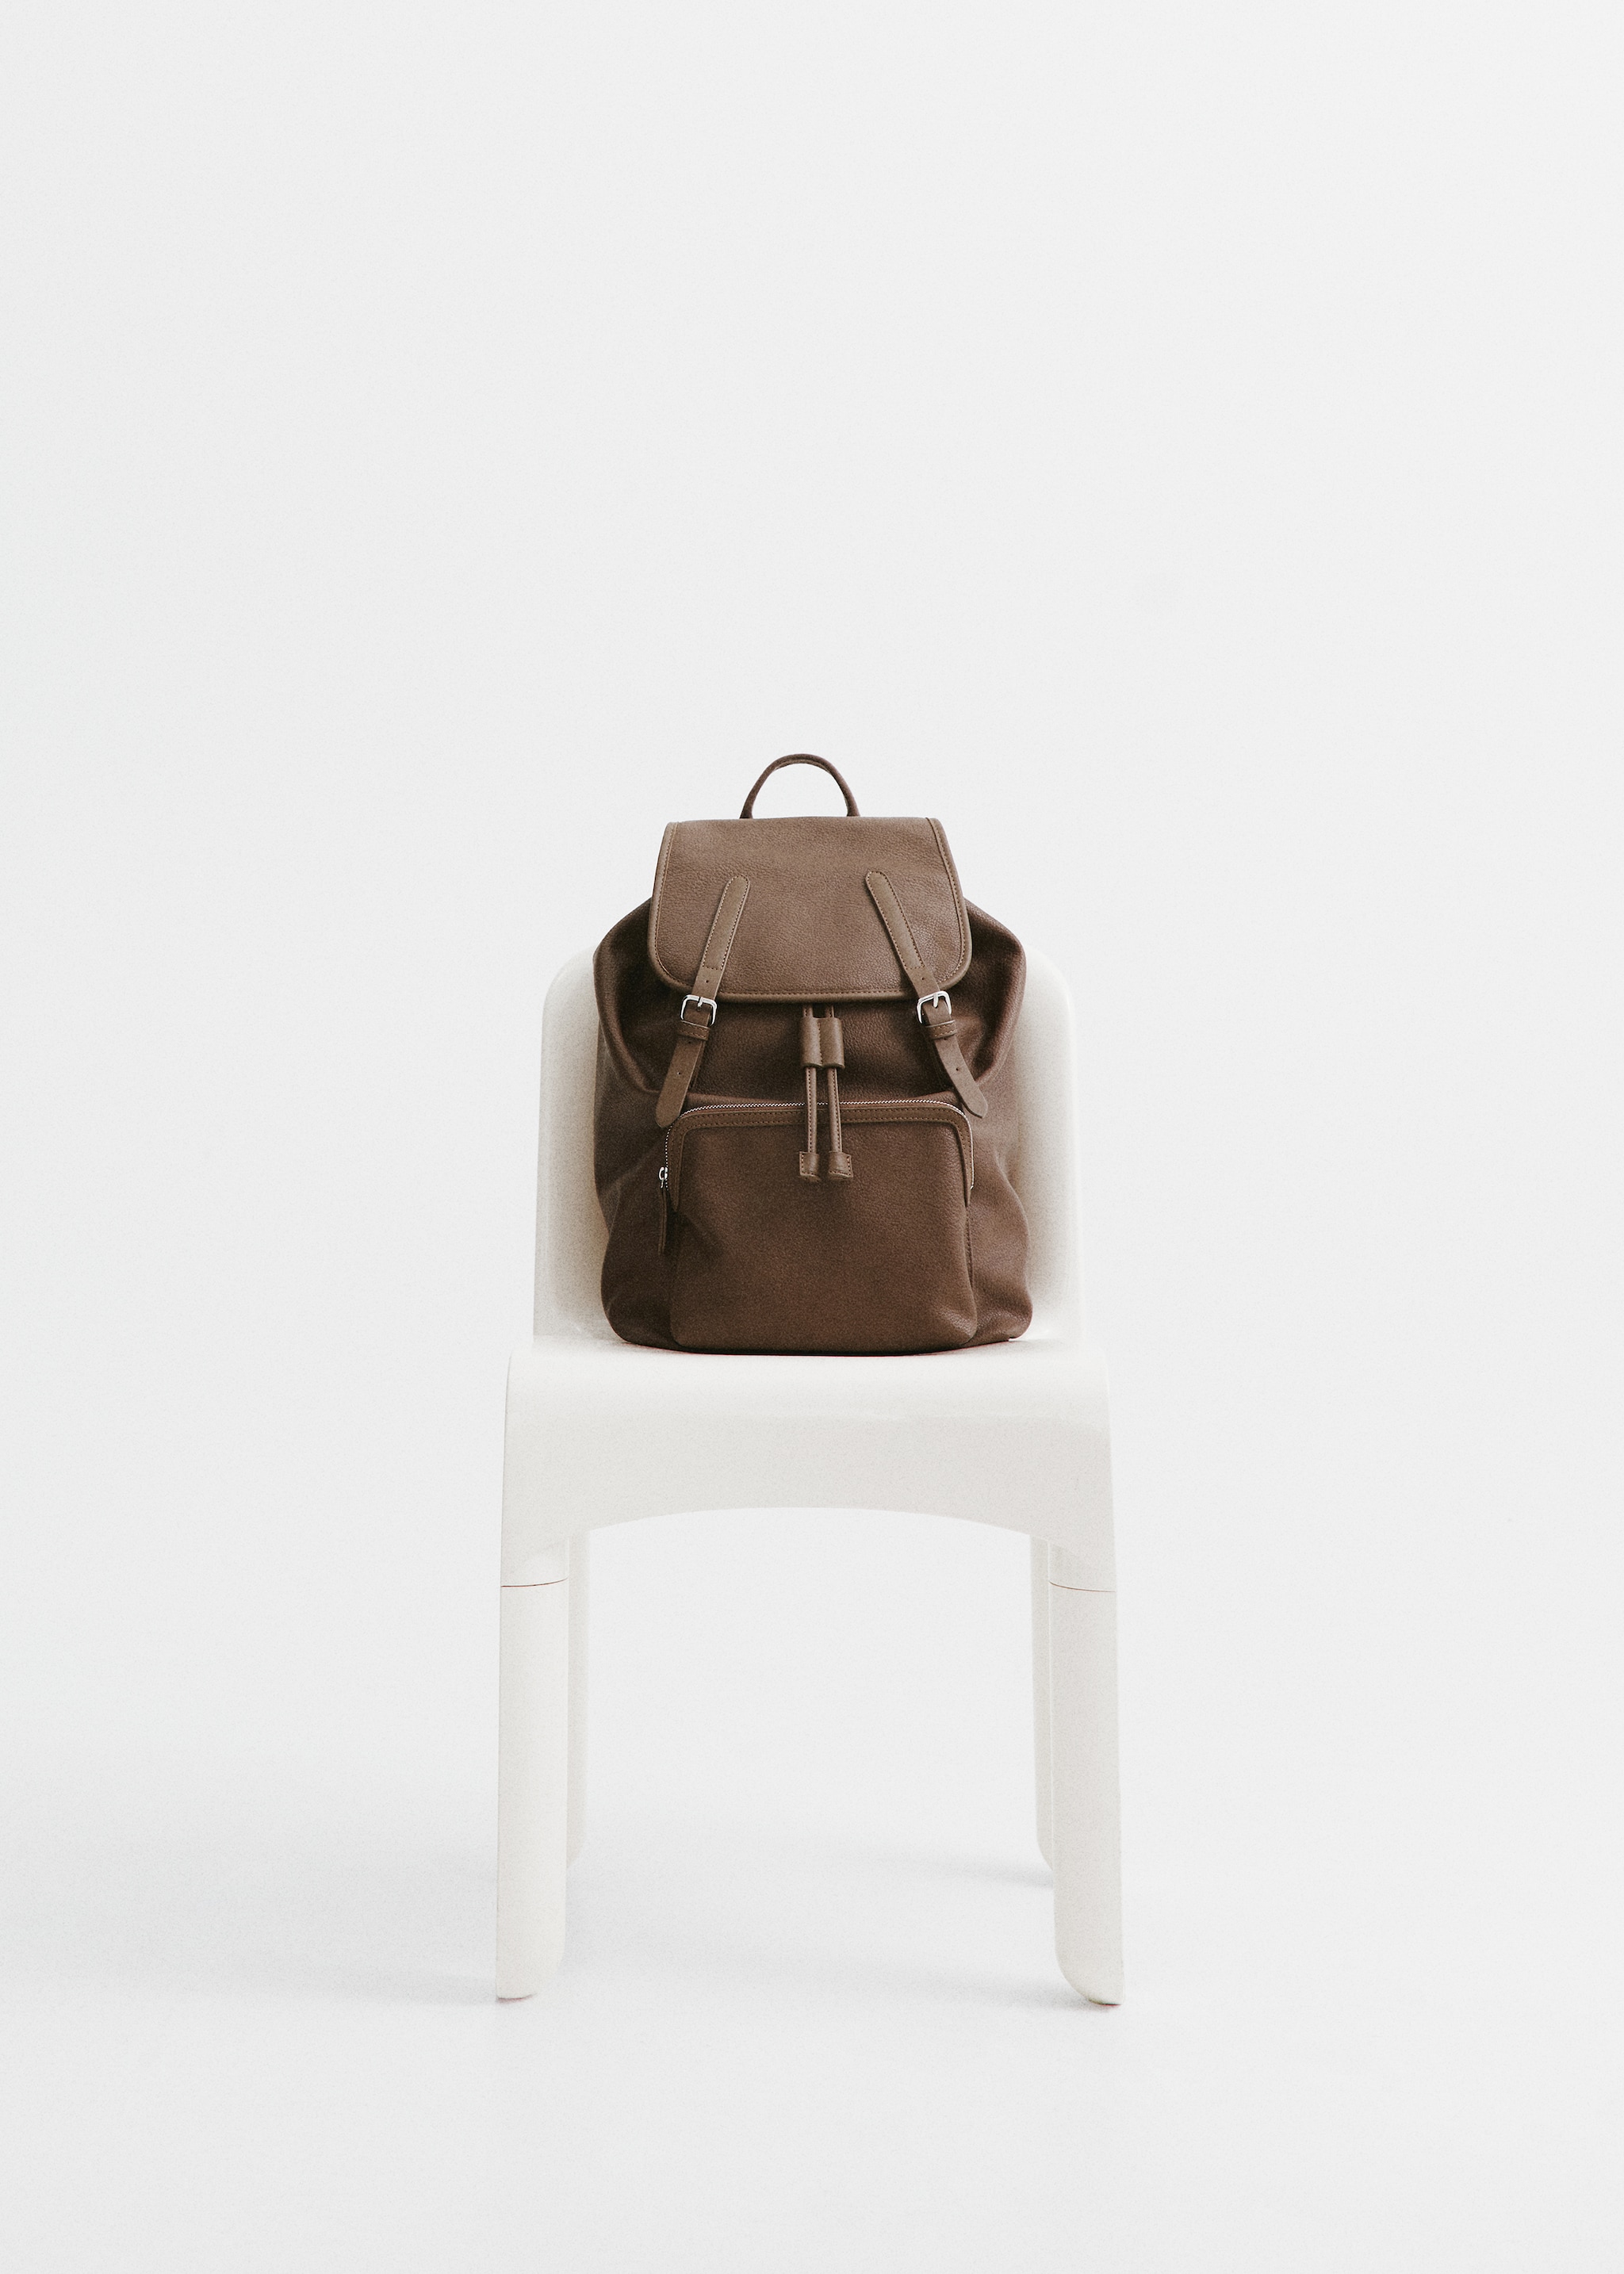 Leather-effect backpack - General plane